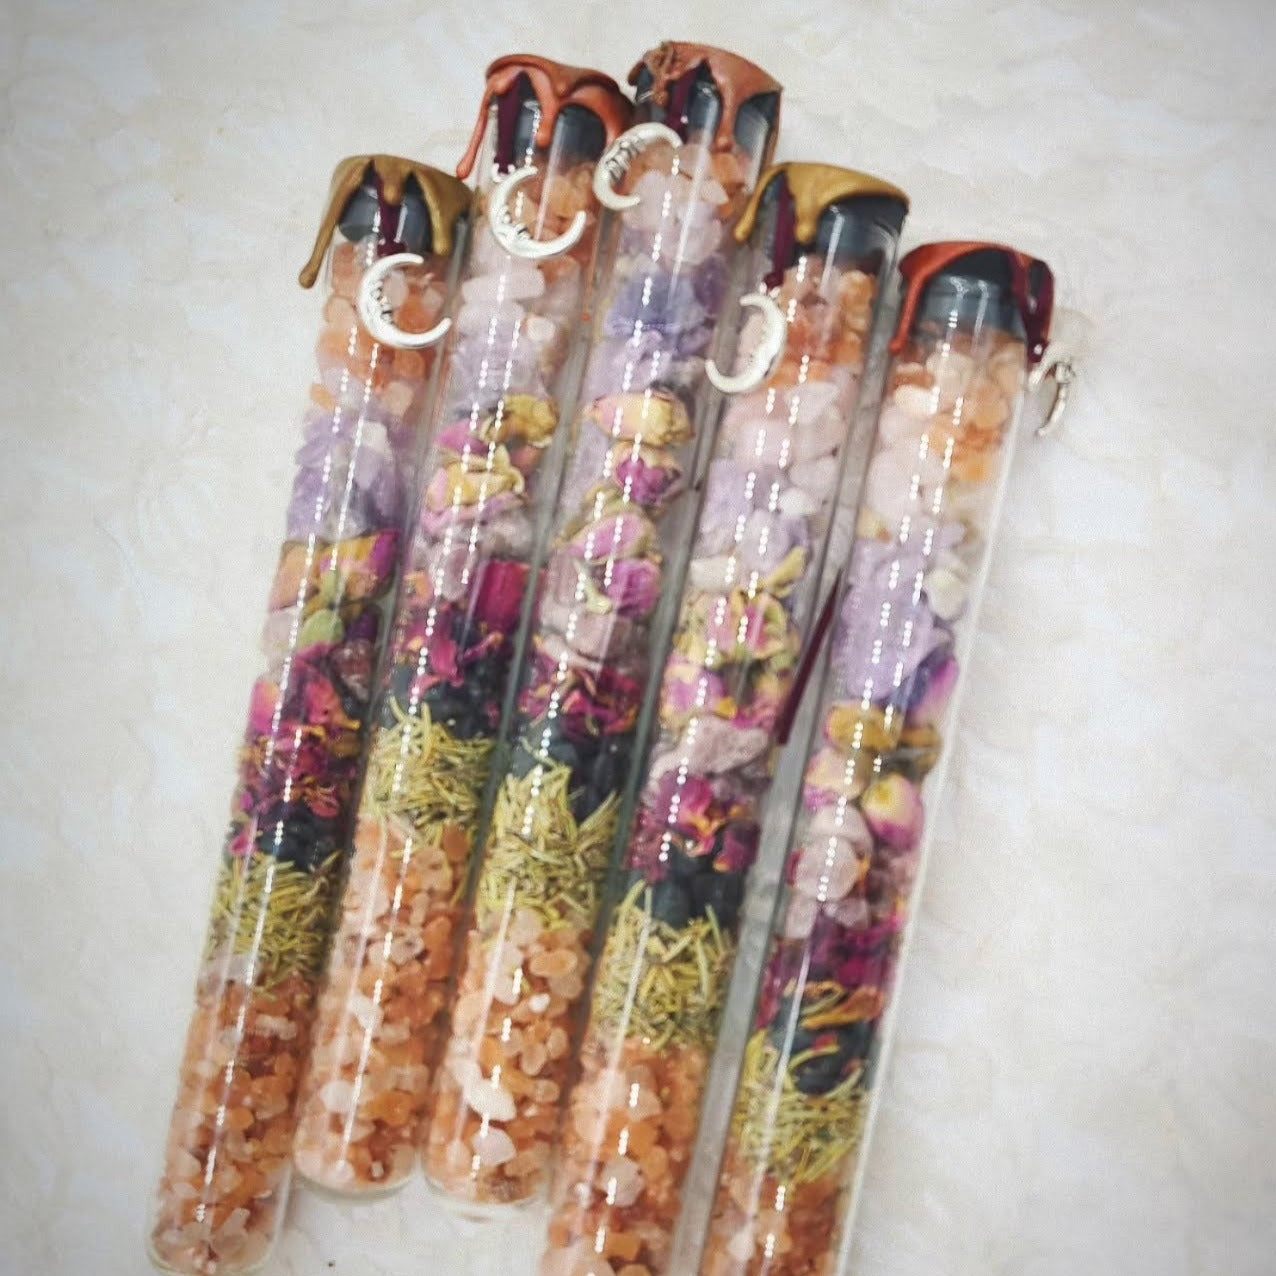 Fall Protection Witch's Spell Jar Tubes ~ Handmade By Me ~ Salt, Black Tourmaline, Rosemary, Rose Petals, Mugwort, Rue, Rose Quartz, Amethyst, and More